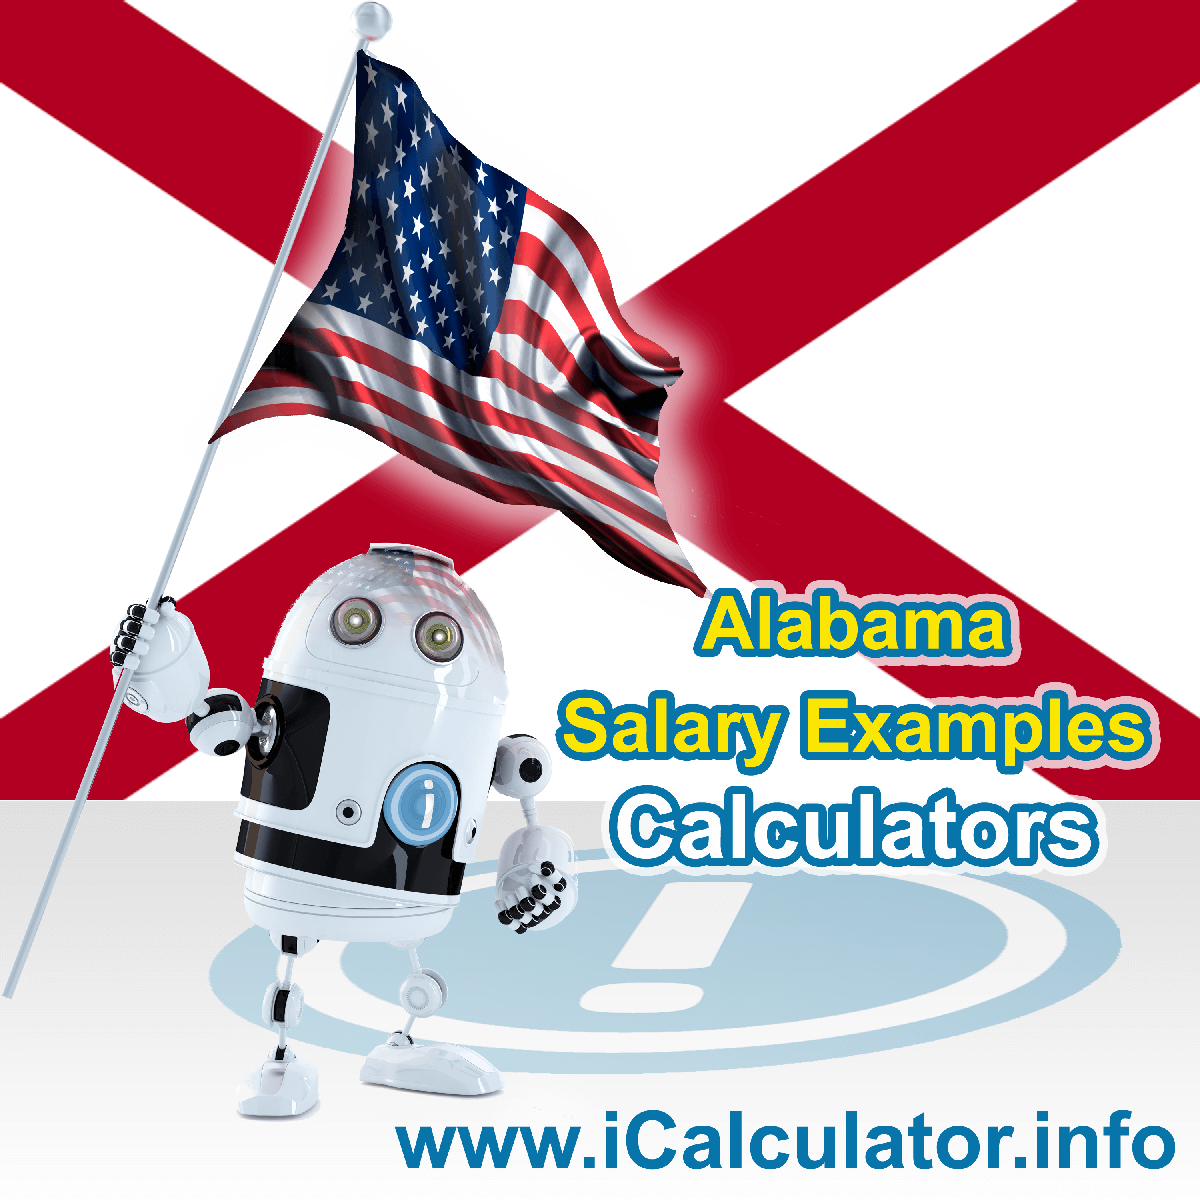 Alabama Salary Example for $ 260,000.00 in 2023 | iCalculator™ | $ 260,000.00 salary example for employee and employer paying Alabama State tincome taxes. Detailed salary after tax calculation including Alabama State Tax, Federal State Tax, Medicare Deductions, Social Security, Capital Gains and other income tax and salary deductions complete with supporting Alabama state tax tables 